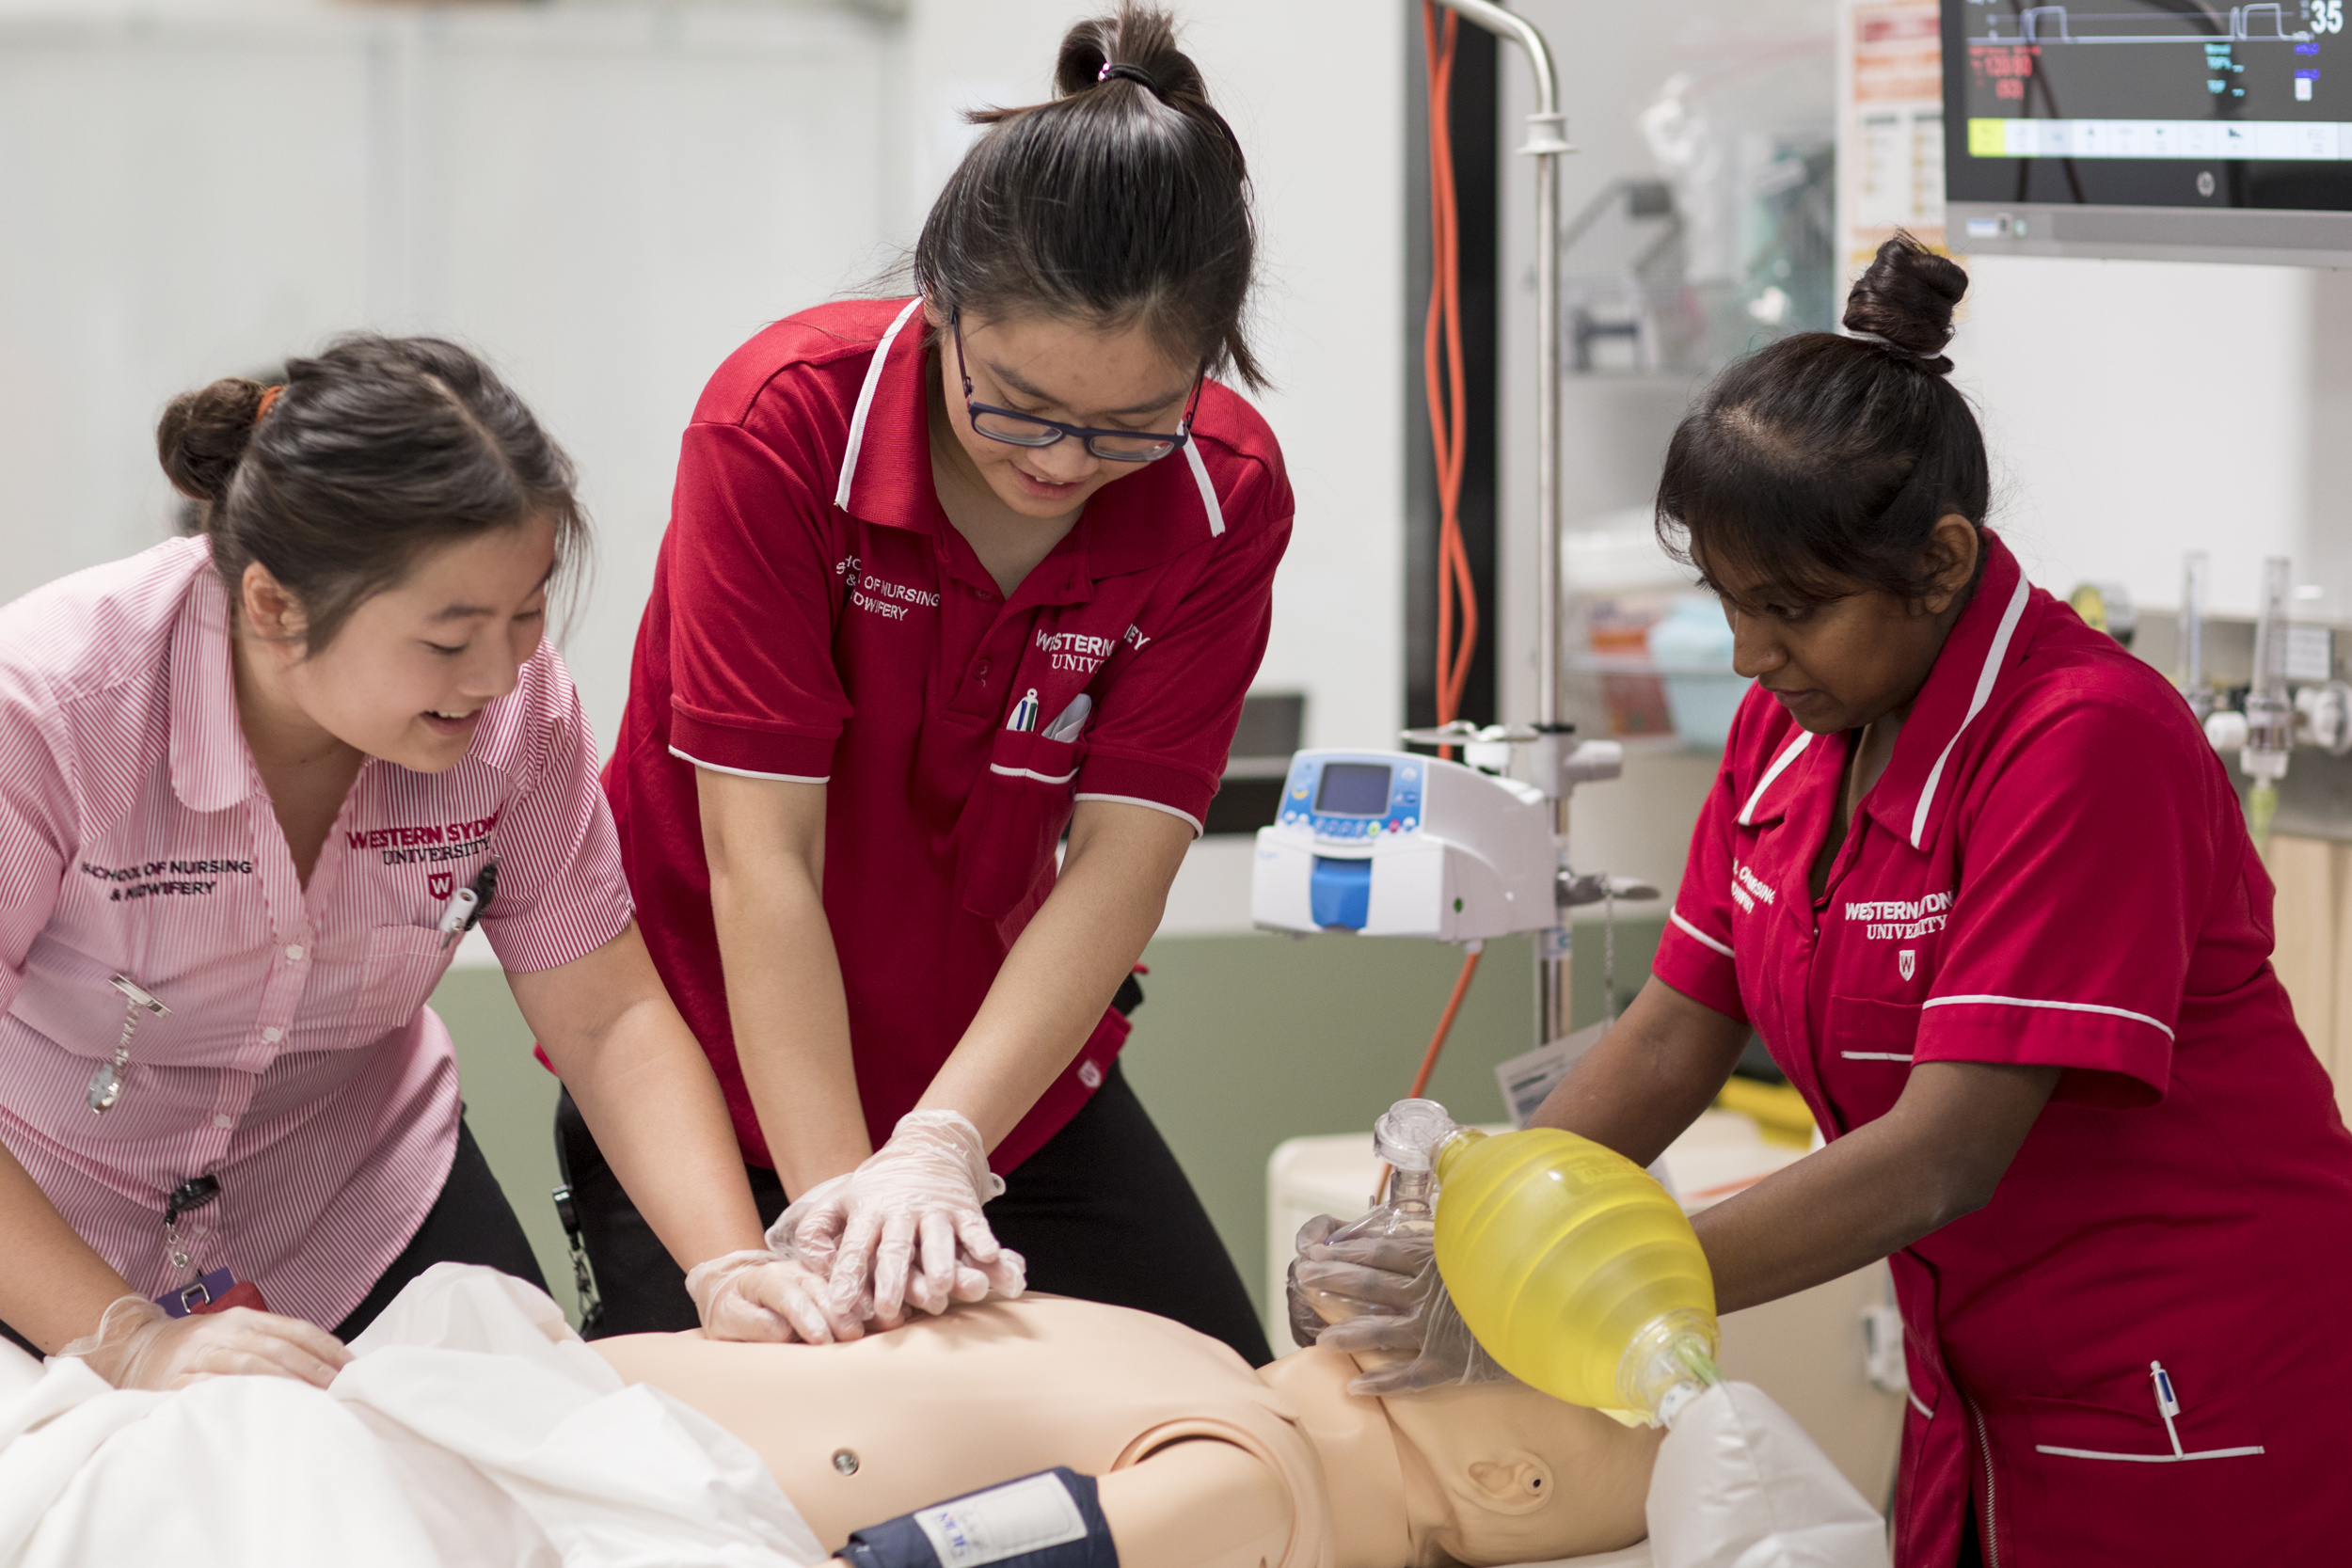 Work ready experience - nursing students practice CPR